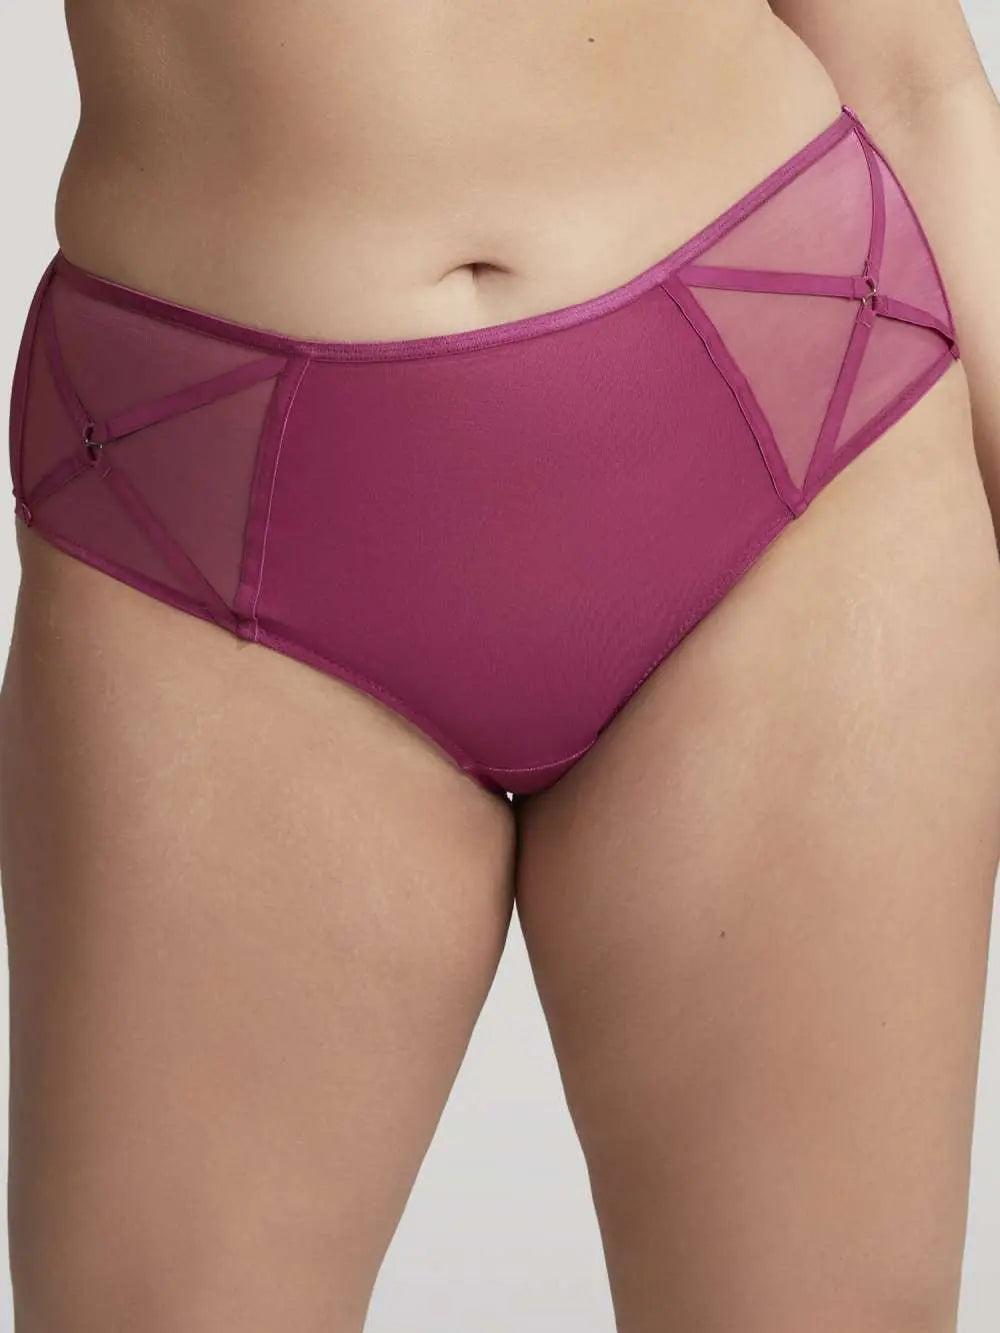 Panache Dionne Brief in orchid color